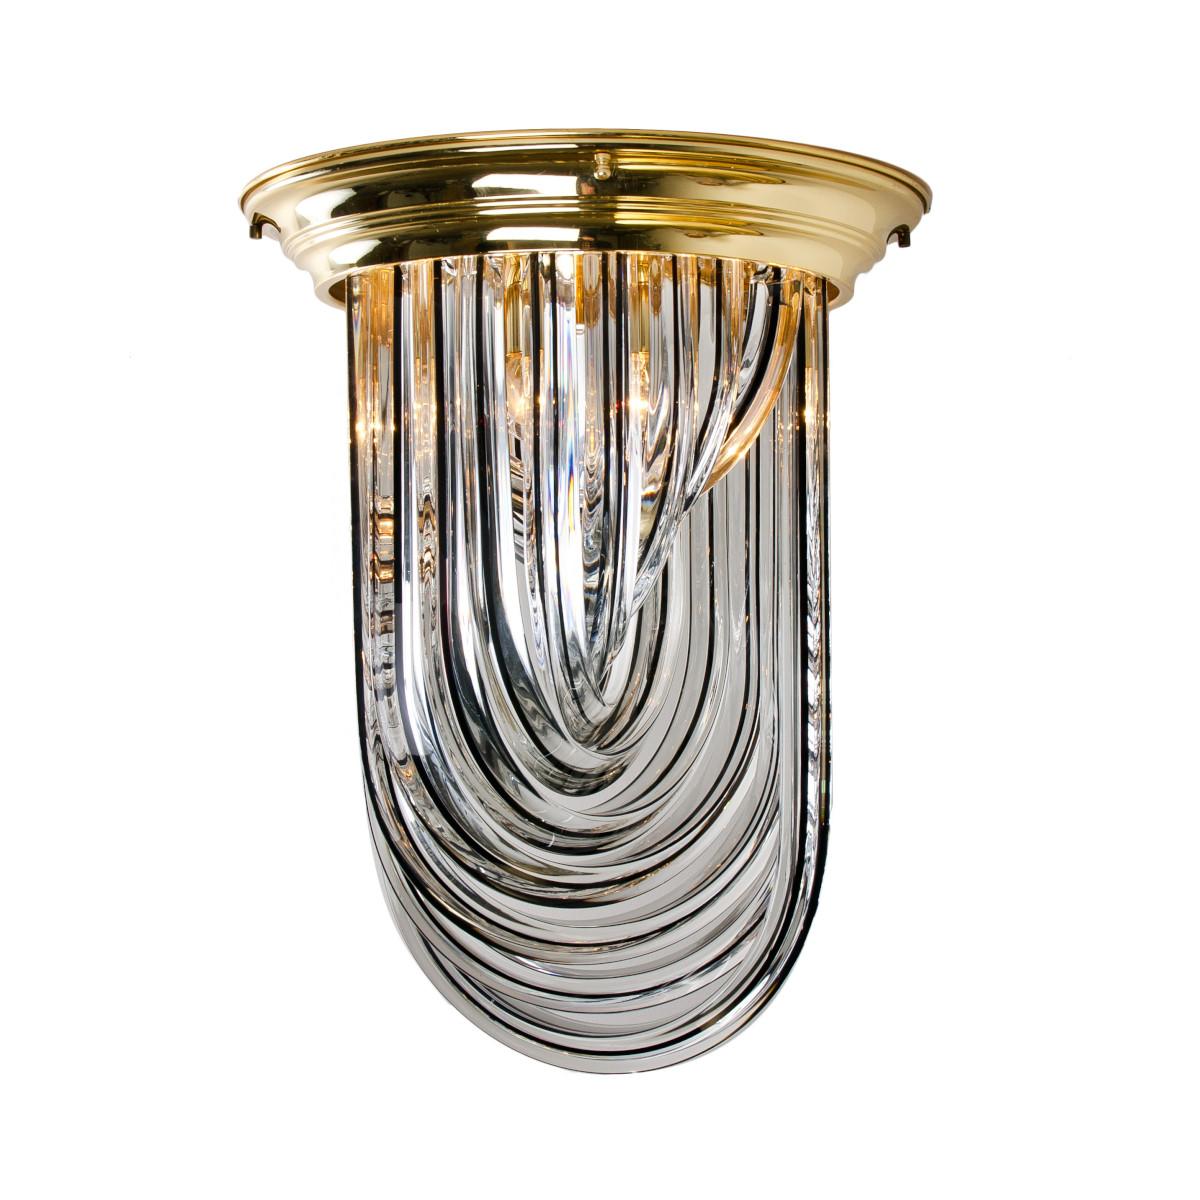 Venini Flush Mount, Brass and Curve Glass with Black Stripe, 1970 For Sale 3